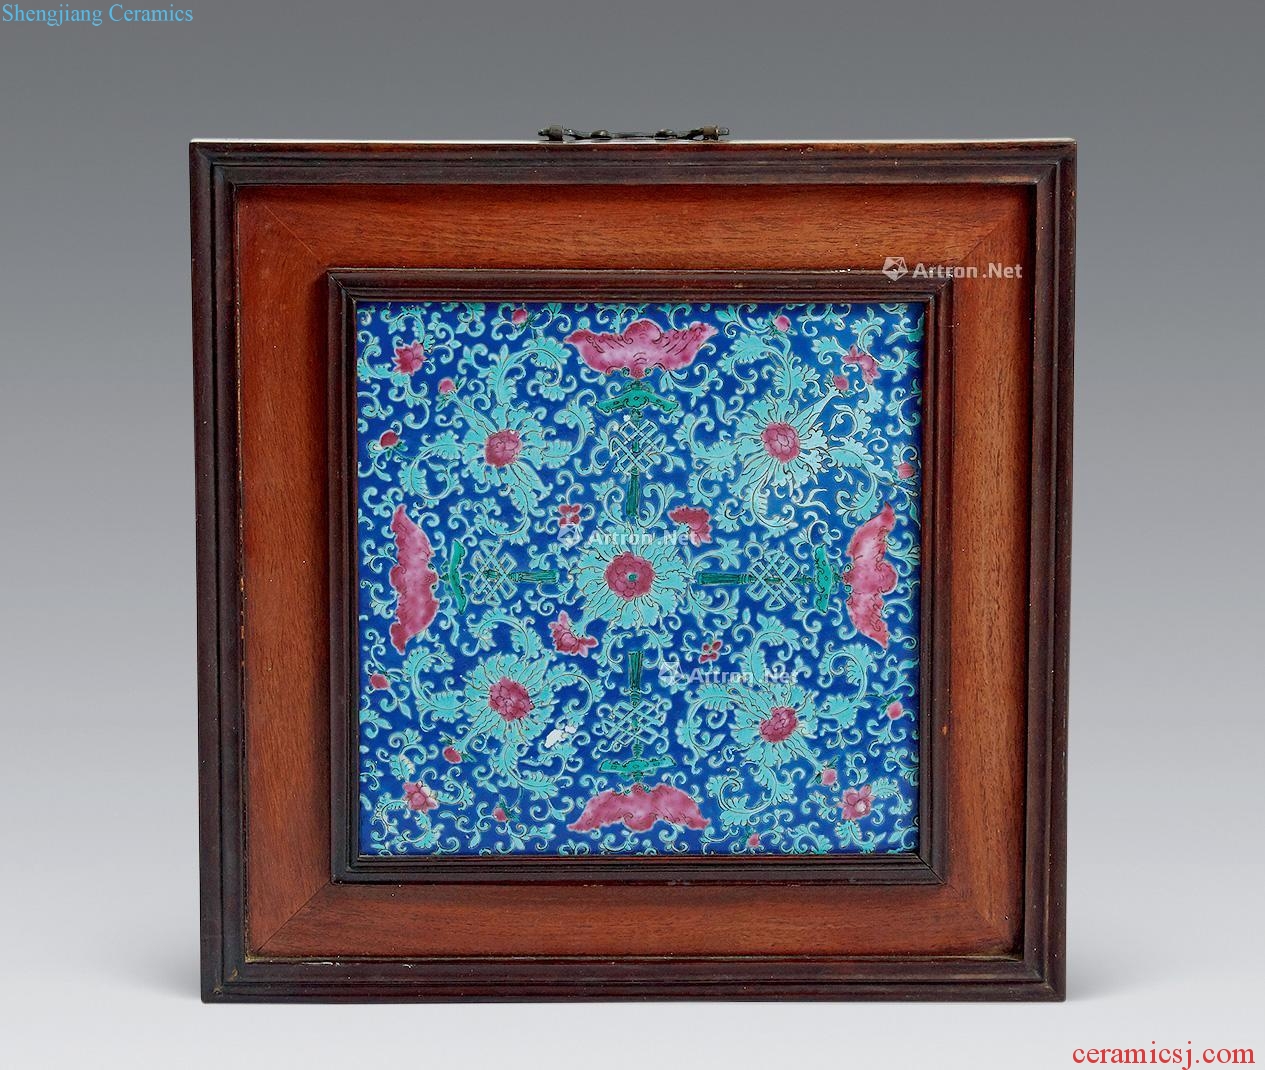 Pastel bound branch patterns in the qing dynasty porcelain plate wall hanging